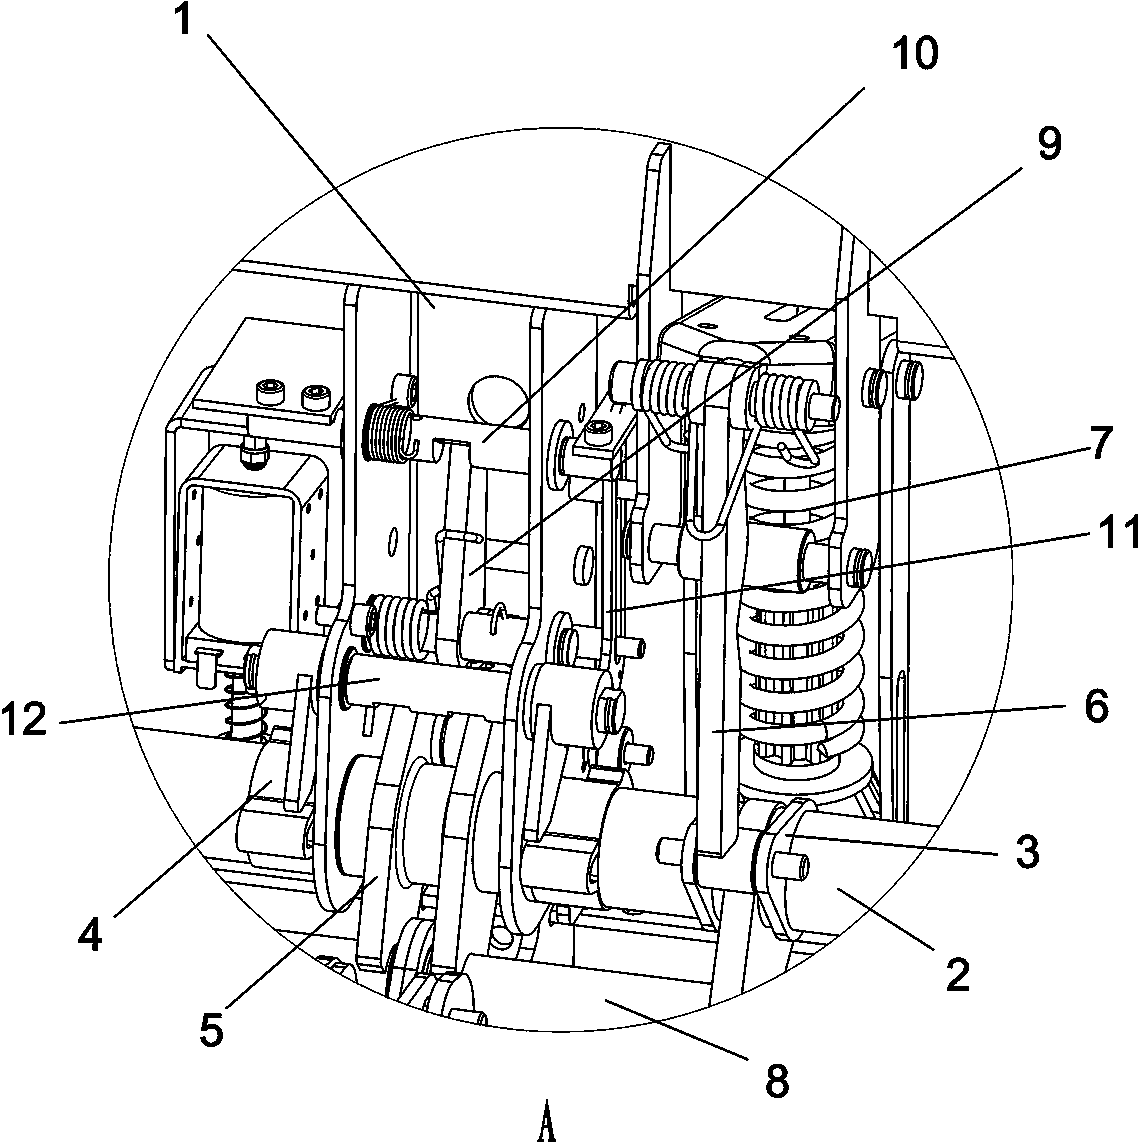 Spring energy storage mechanism for vacuum load switch